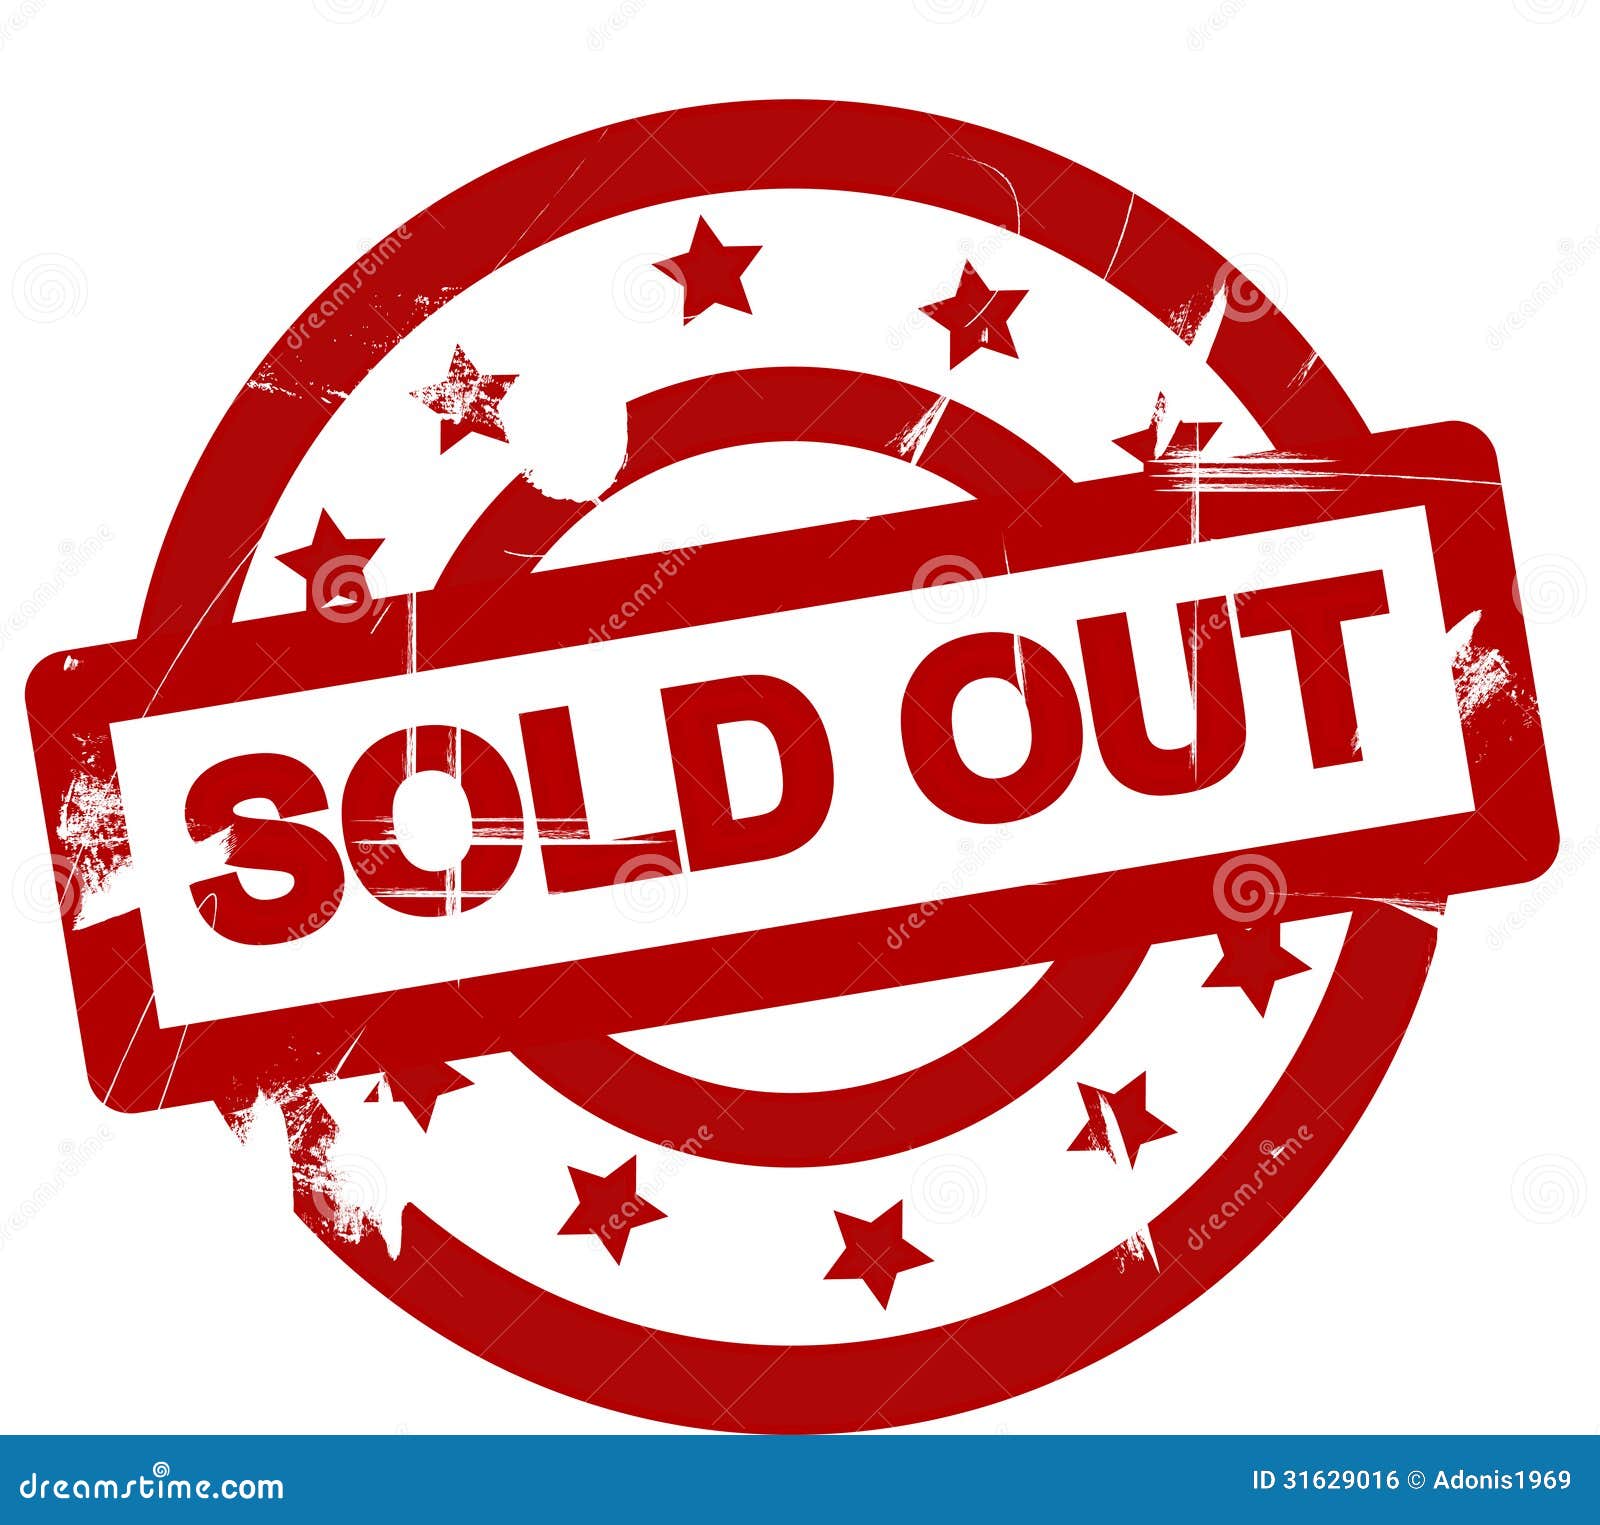 Sold Out Royalty Free Stock Image - Image: 31629016